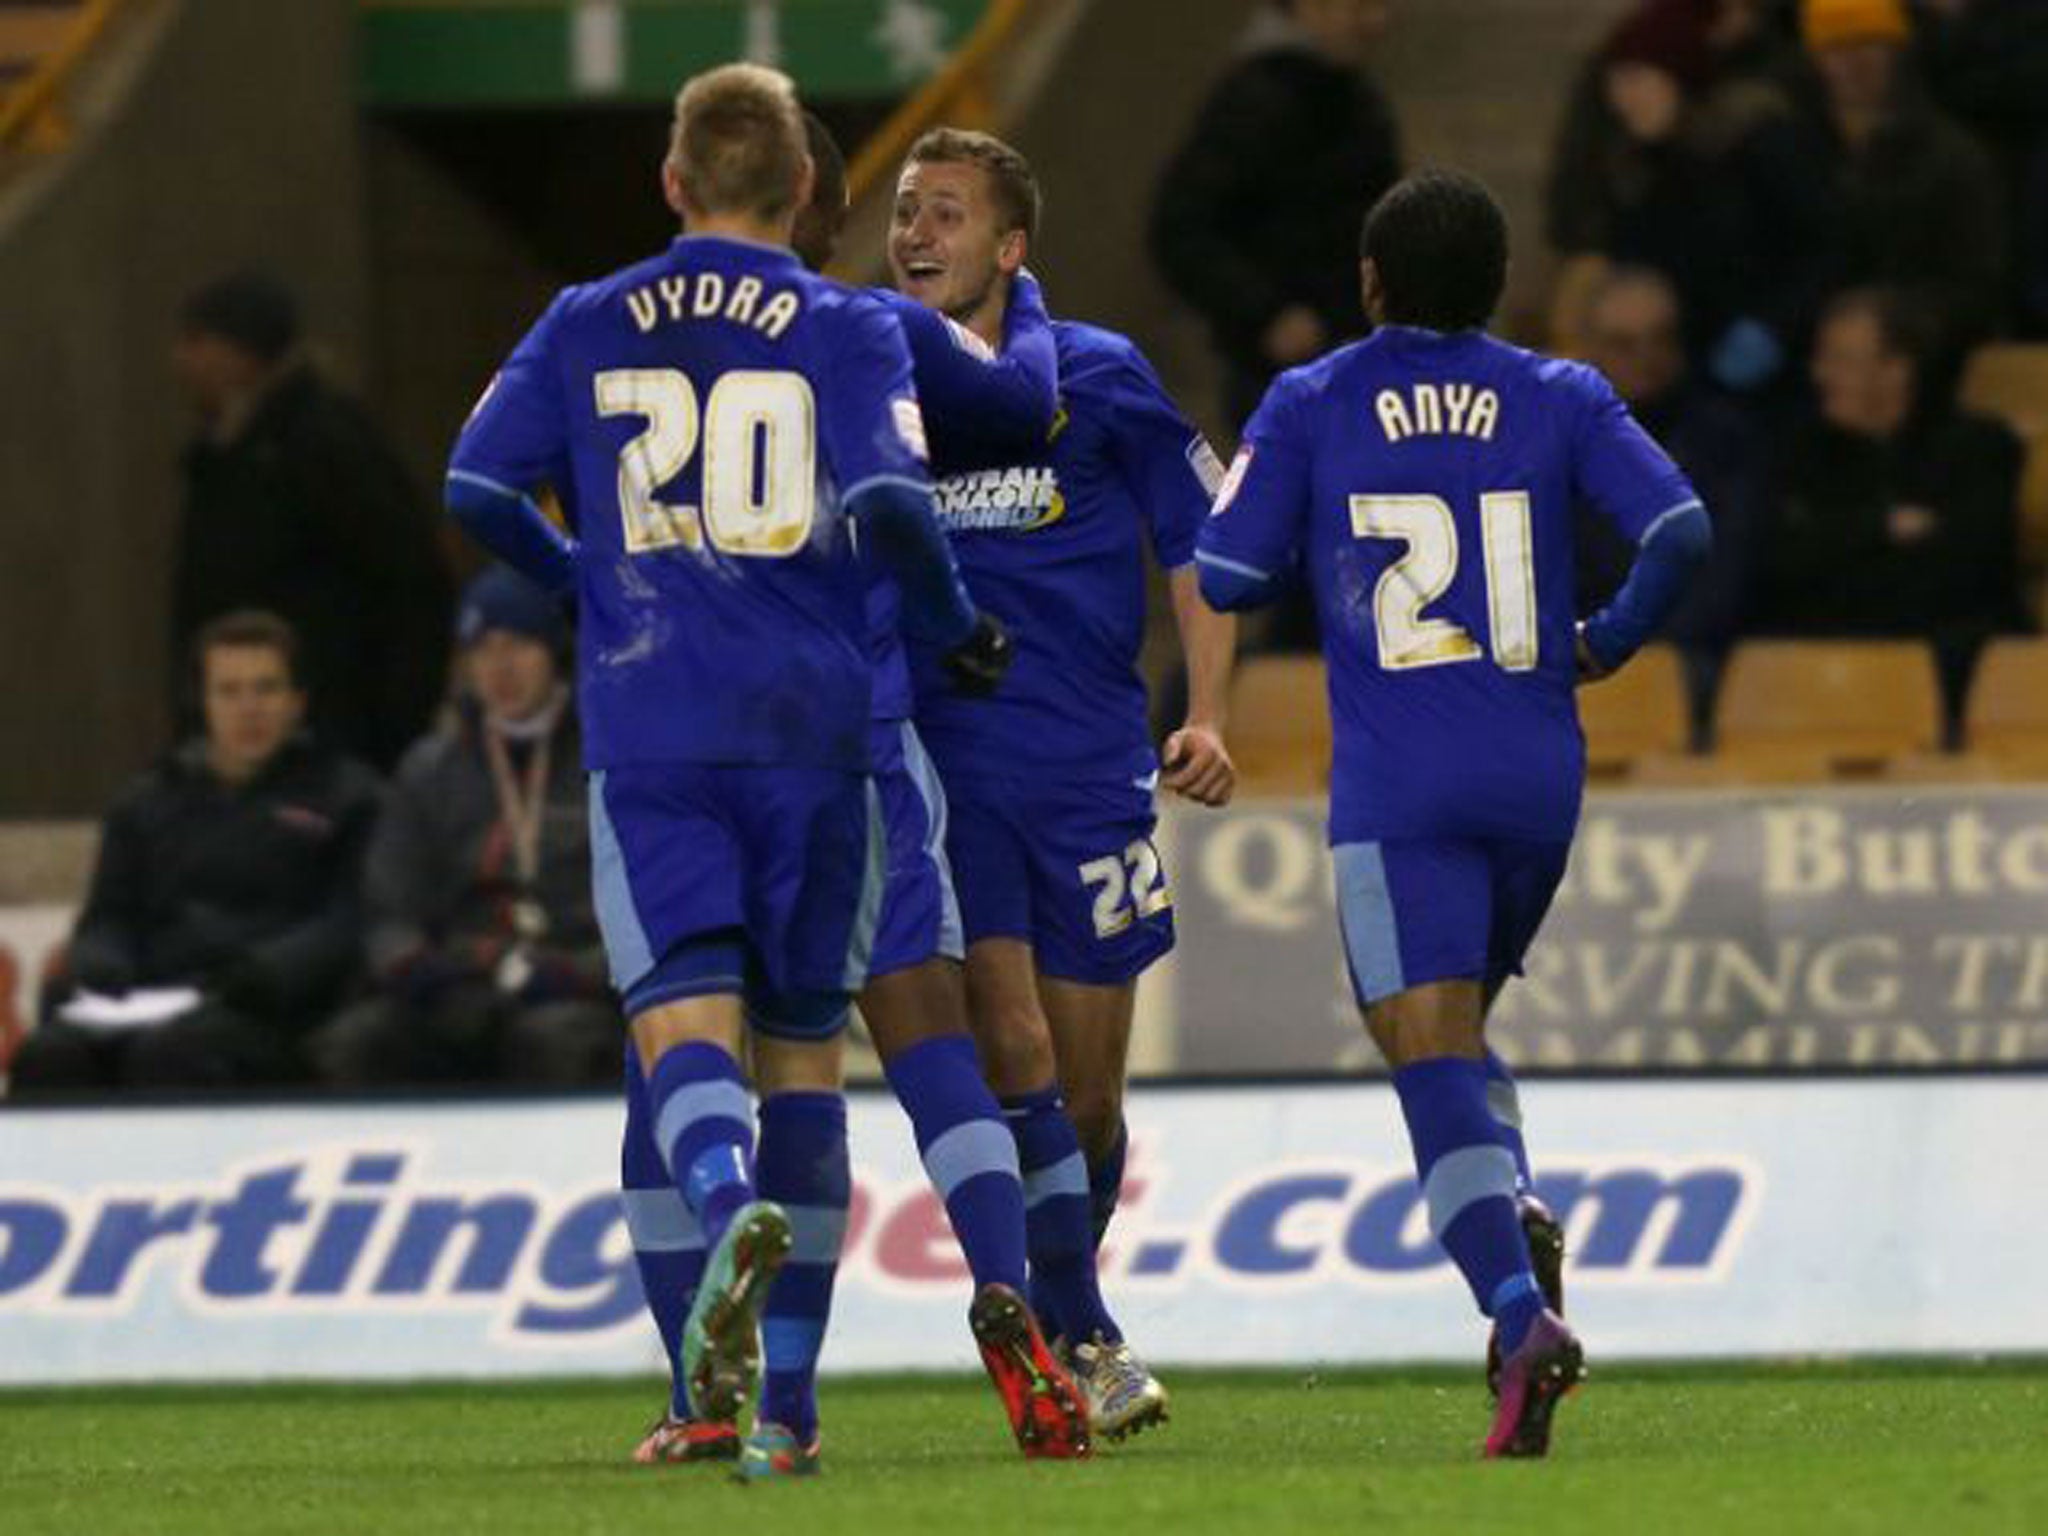 Almen Abdi: Scored his 10th goal of the season when he put Watford ahead with a curling free-kick